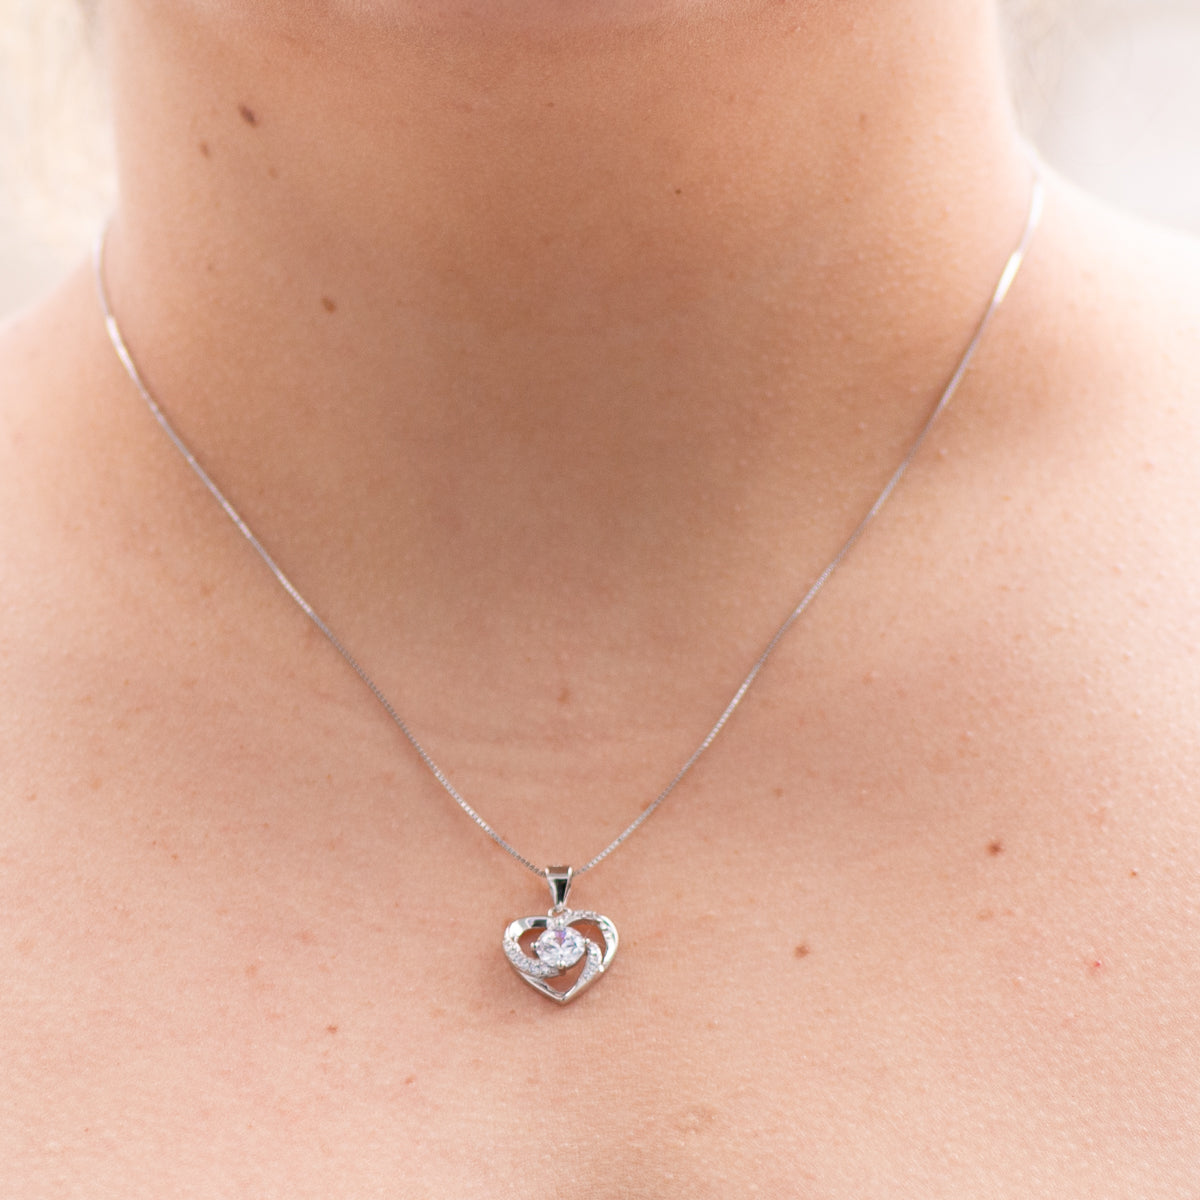 Straighten Your Crown Heart Swirl Silver Necklace - Soulmate